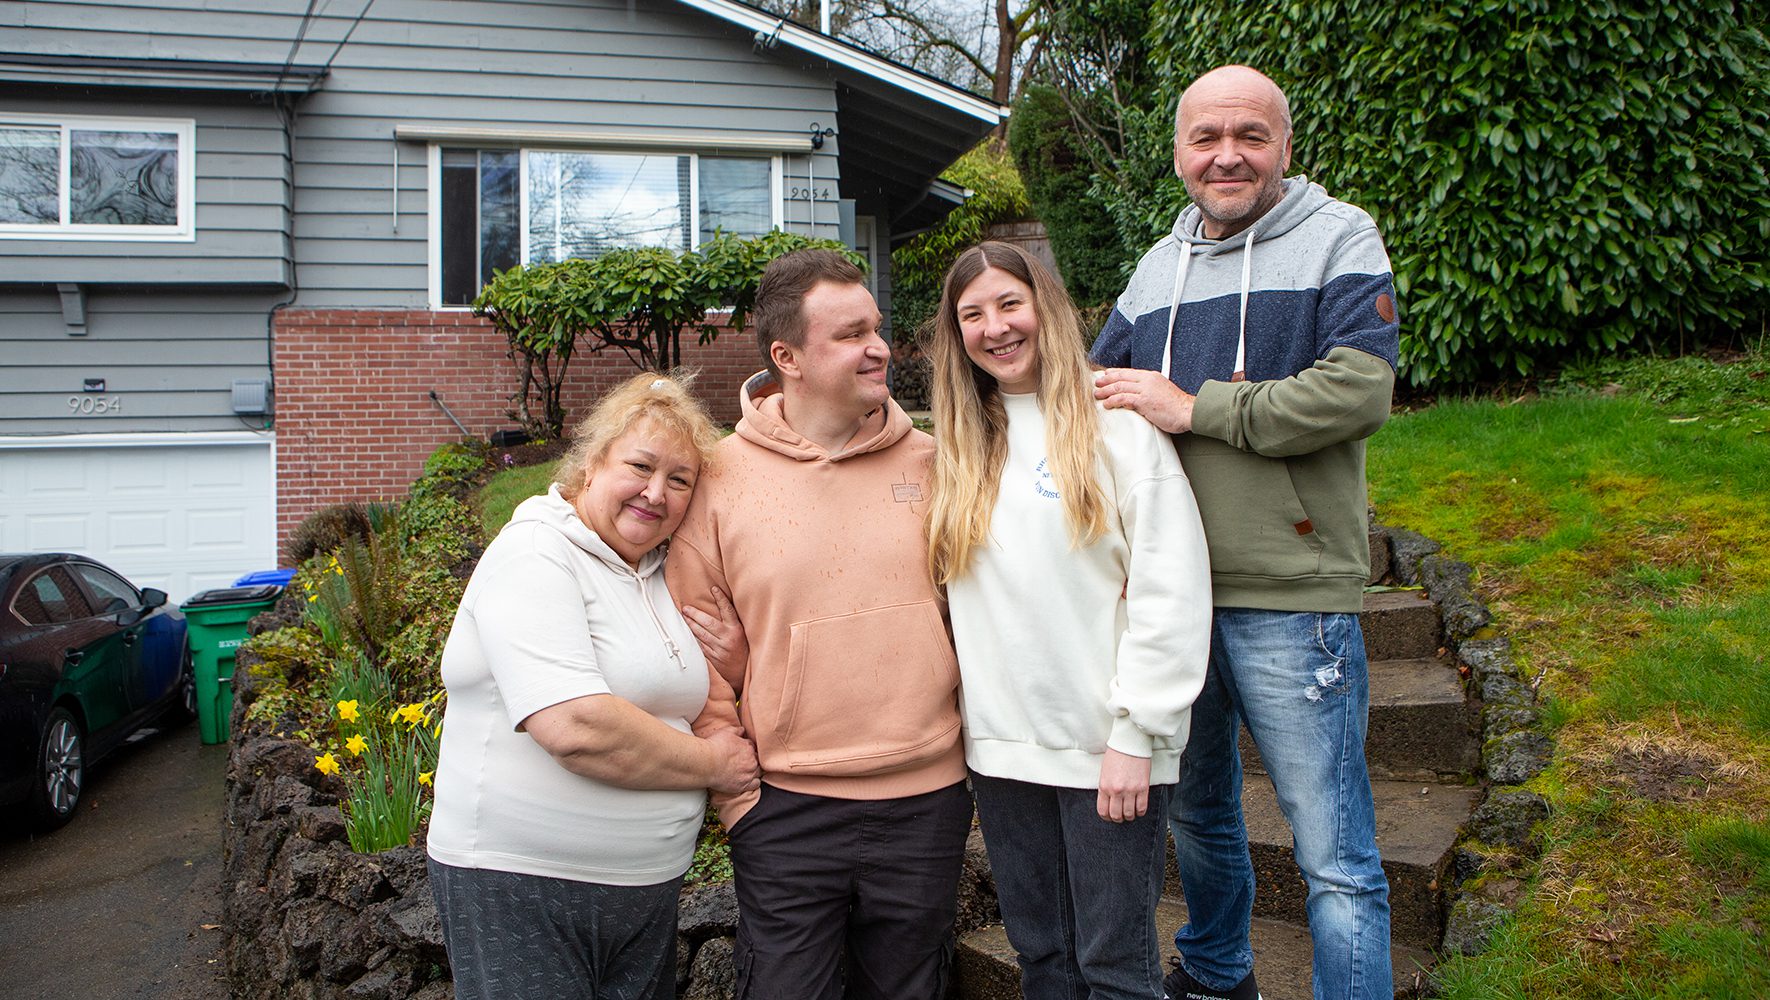 Standing outside their new home in Portland, Oregon are from left to right, Tamila Kushnarova, her son Eduard Levit, his wife Daria Levit and Tamila’s husband Oleksandr Kushnarov. After fleeing the fighting in their hometown of Kharkiv, Ukraine, the family was resettled with help from the ShalomPortland Welcome Circle. | Welcome Circles | HIAS